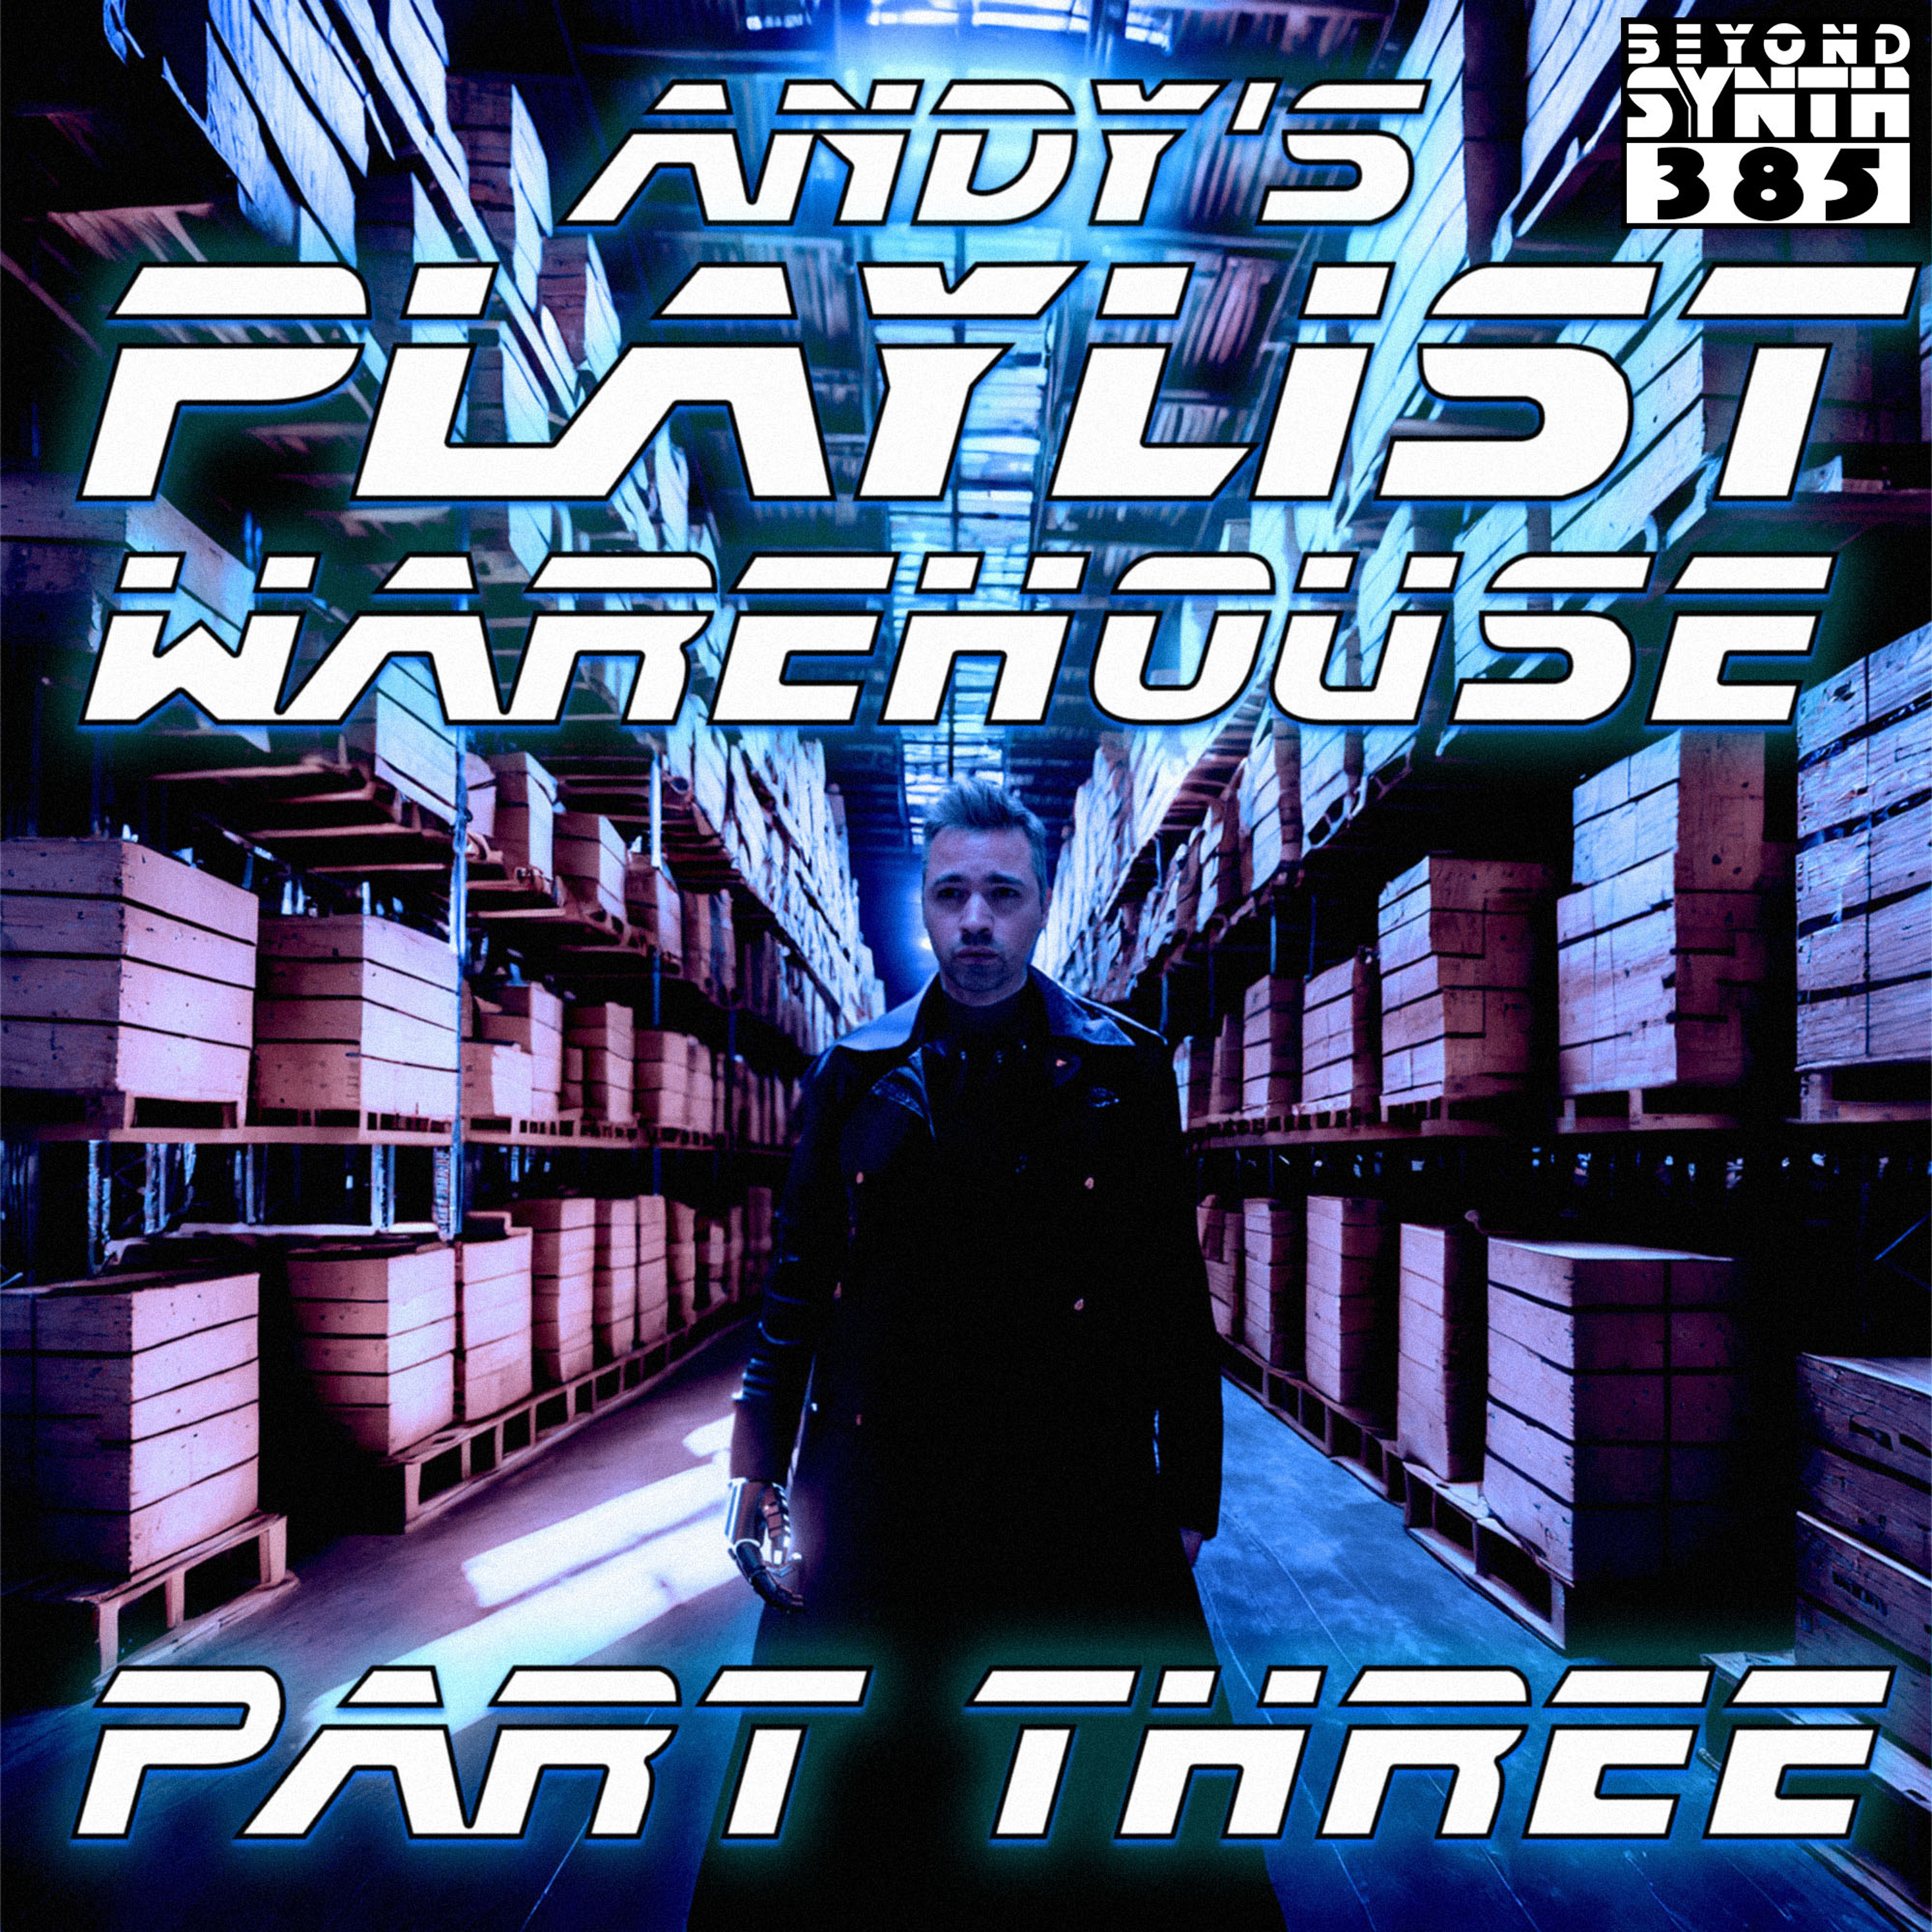 Beyond Synth - 385 - Andy's Playlist Warehouse 03 with Cenotaff Knight Of Ducks and Joe Ozone